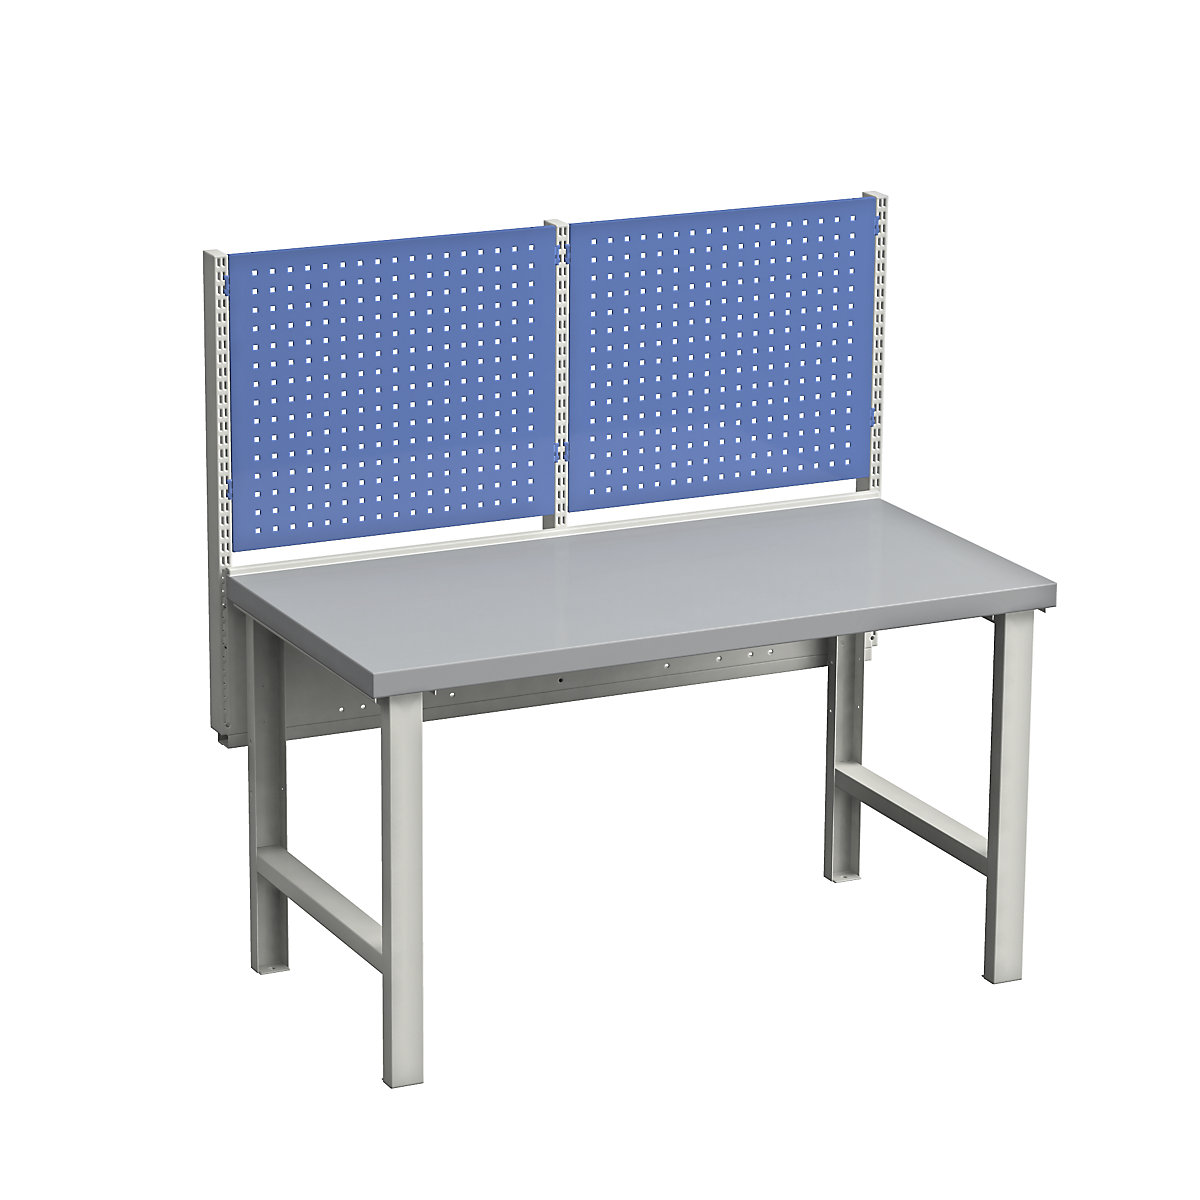 Workbench, modular system – Treston, with 2 perforated panels, sheet steel worktop, WxD 1500 x 750 mm-2